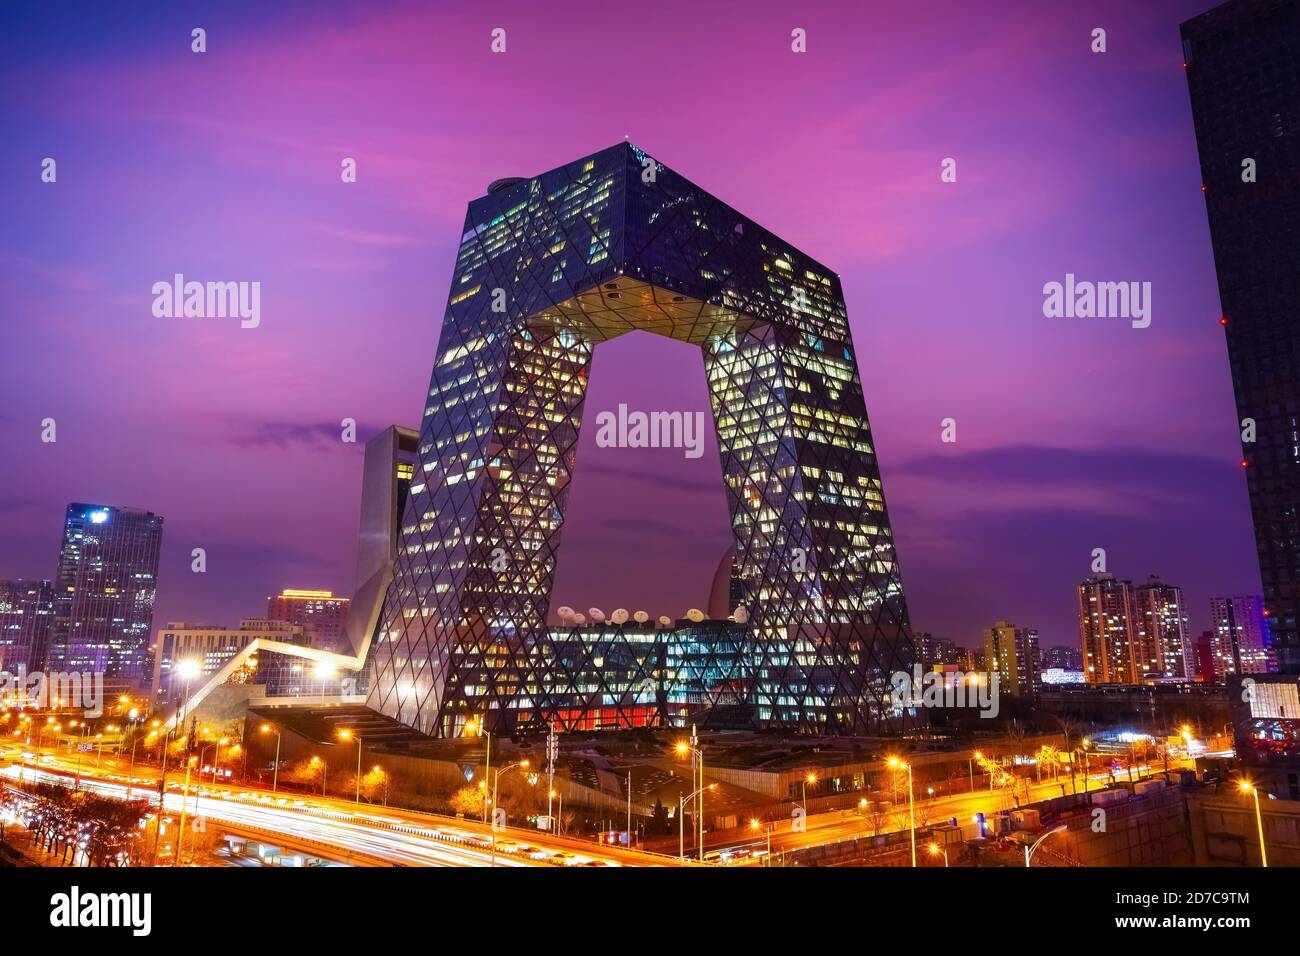 Beijing, China - Jan 12 2020: The CCTV Headquarters on the CMG Guanghua Road Office Area, completed in May 2012, designed by Rem Koolhaas and Ole Sche Stock Photo